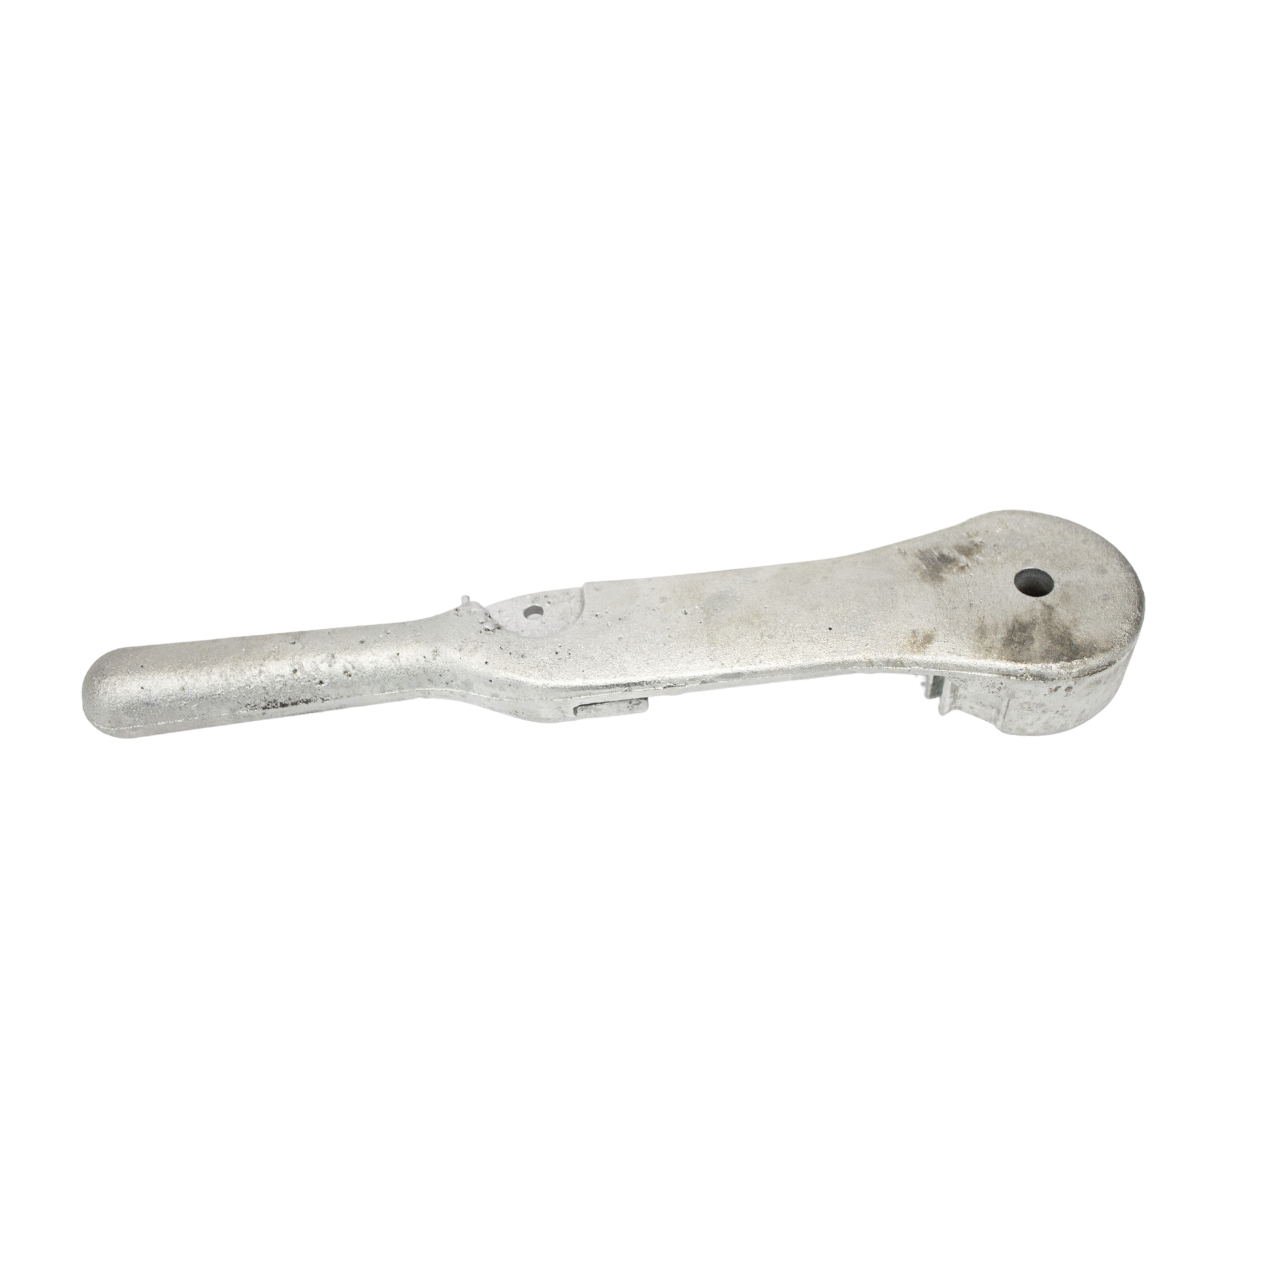 Replacement Parts for All Brands of Ratchet Wrenches